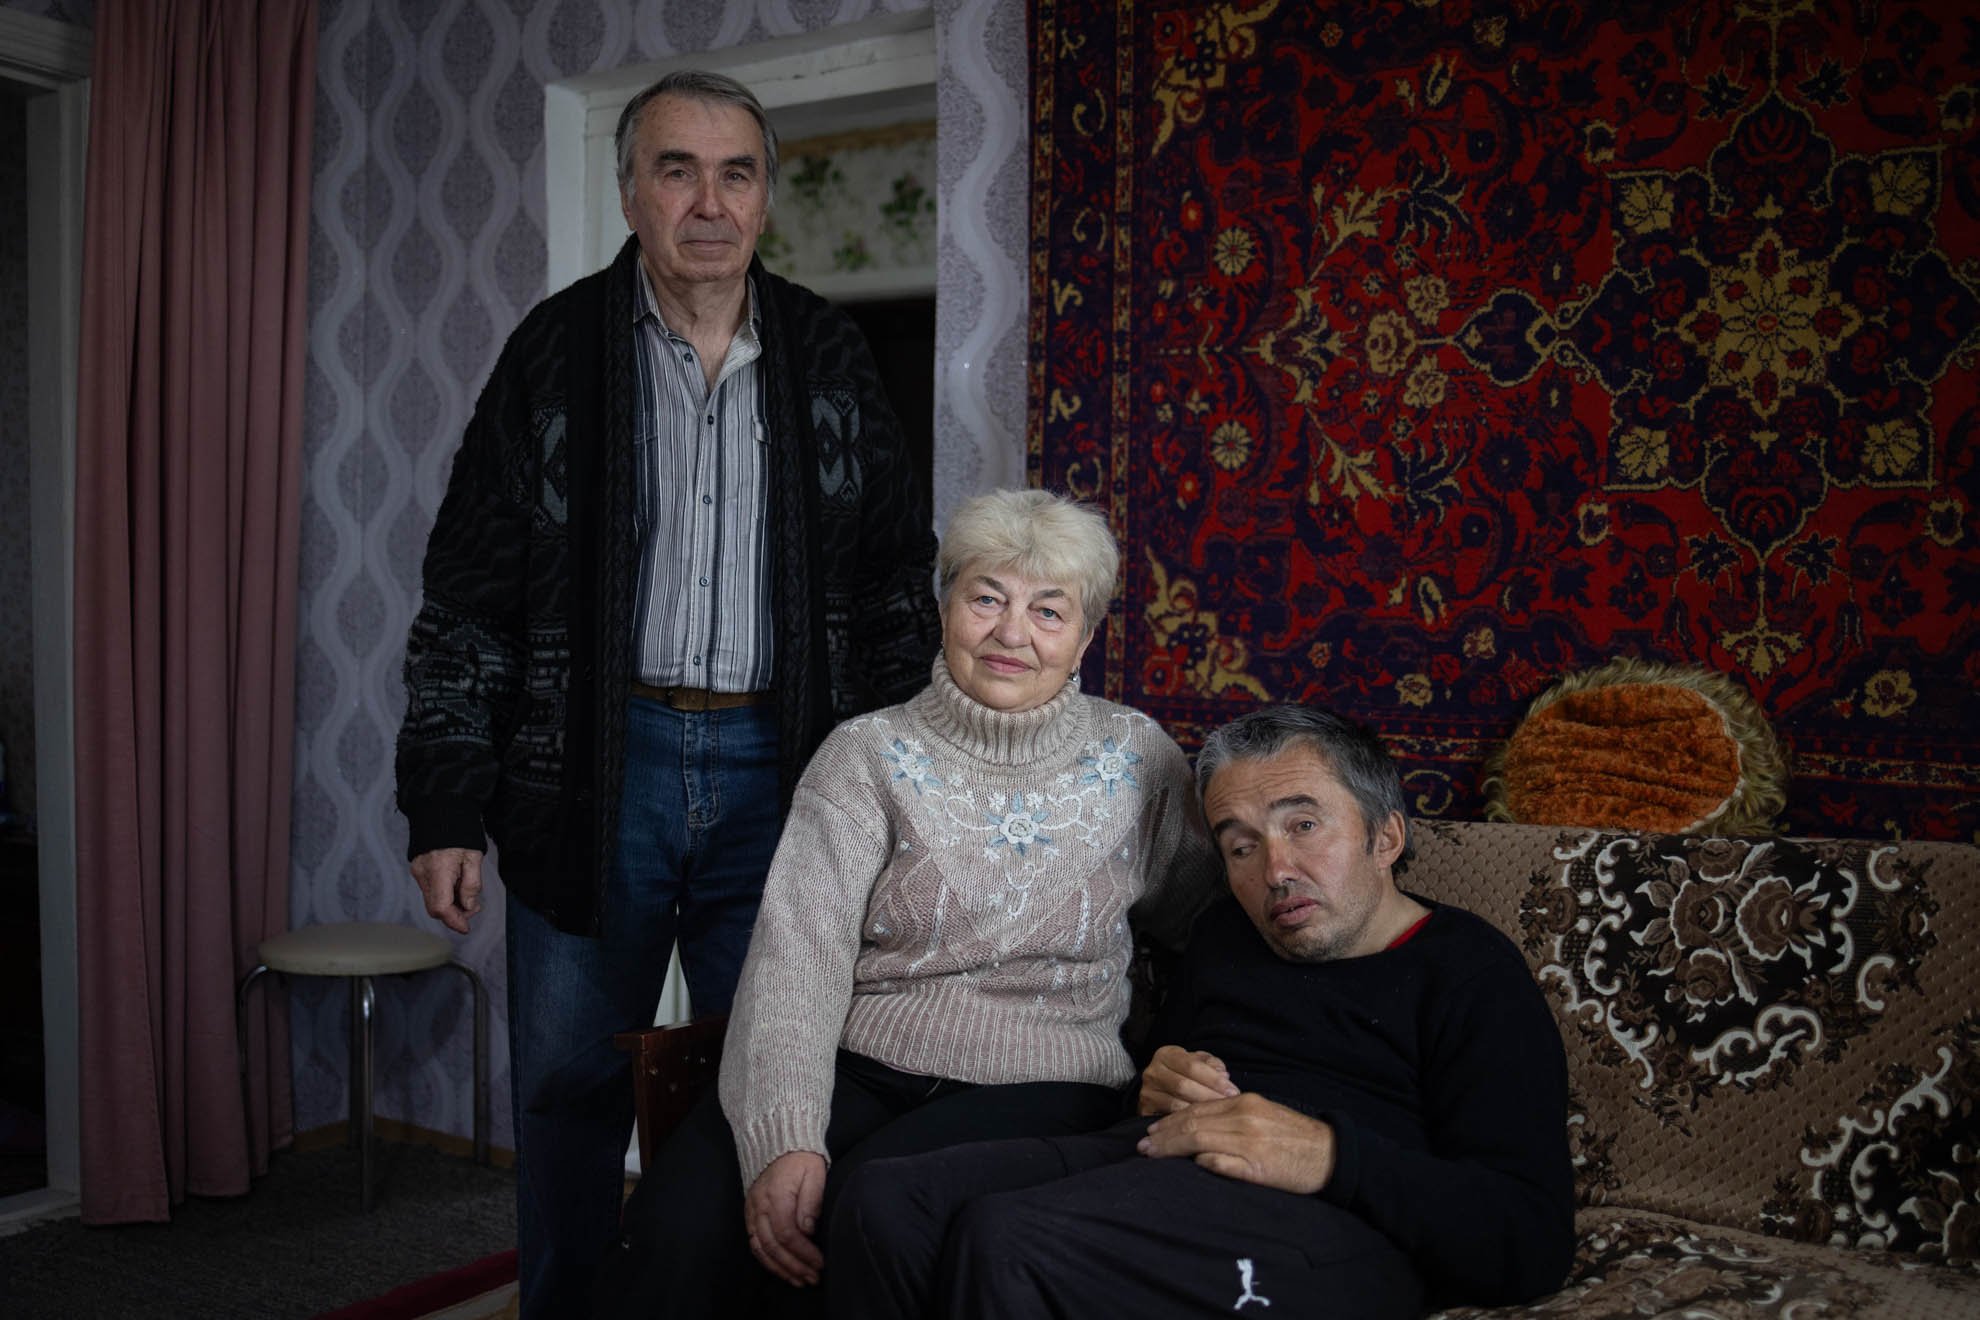 Yevhen is sitting on a brown sofa with his mother sitting next to him and his father standing behind them. 